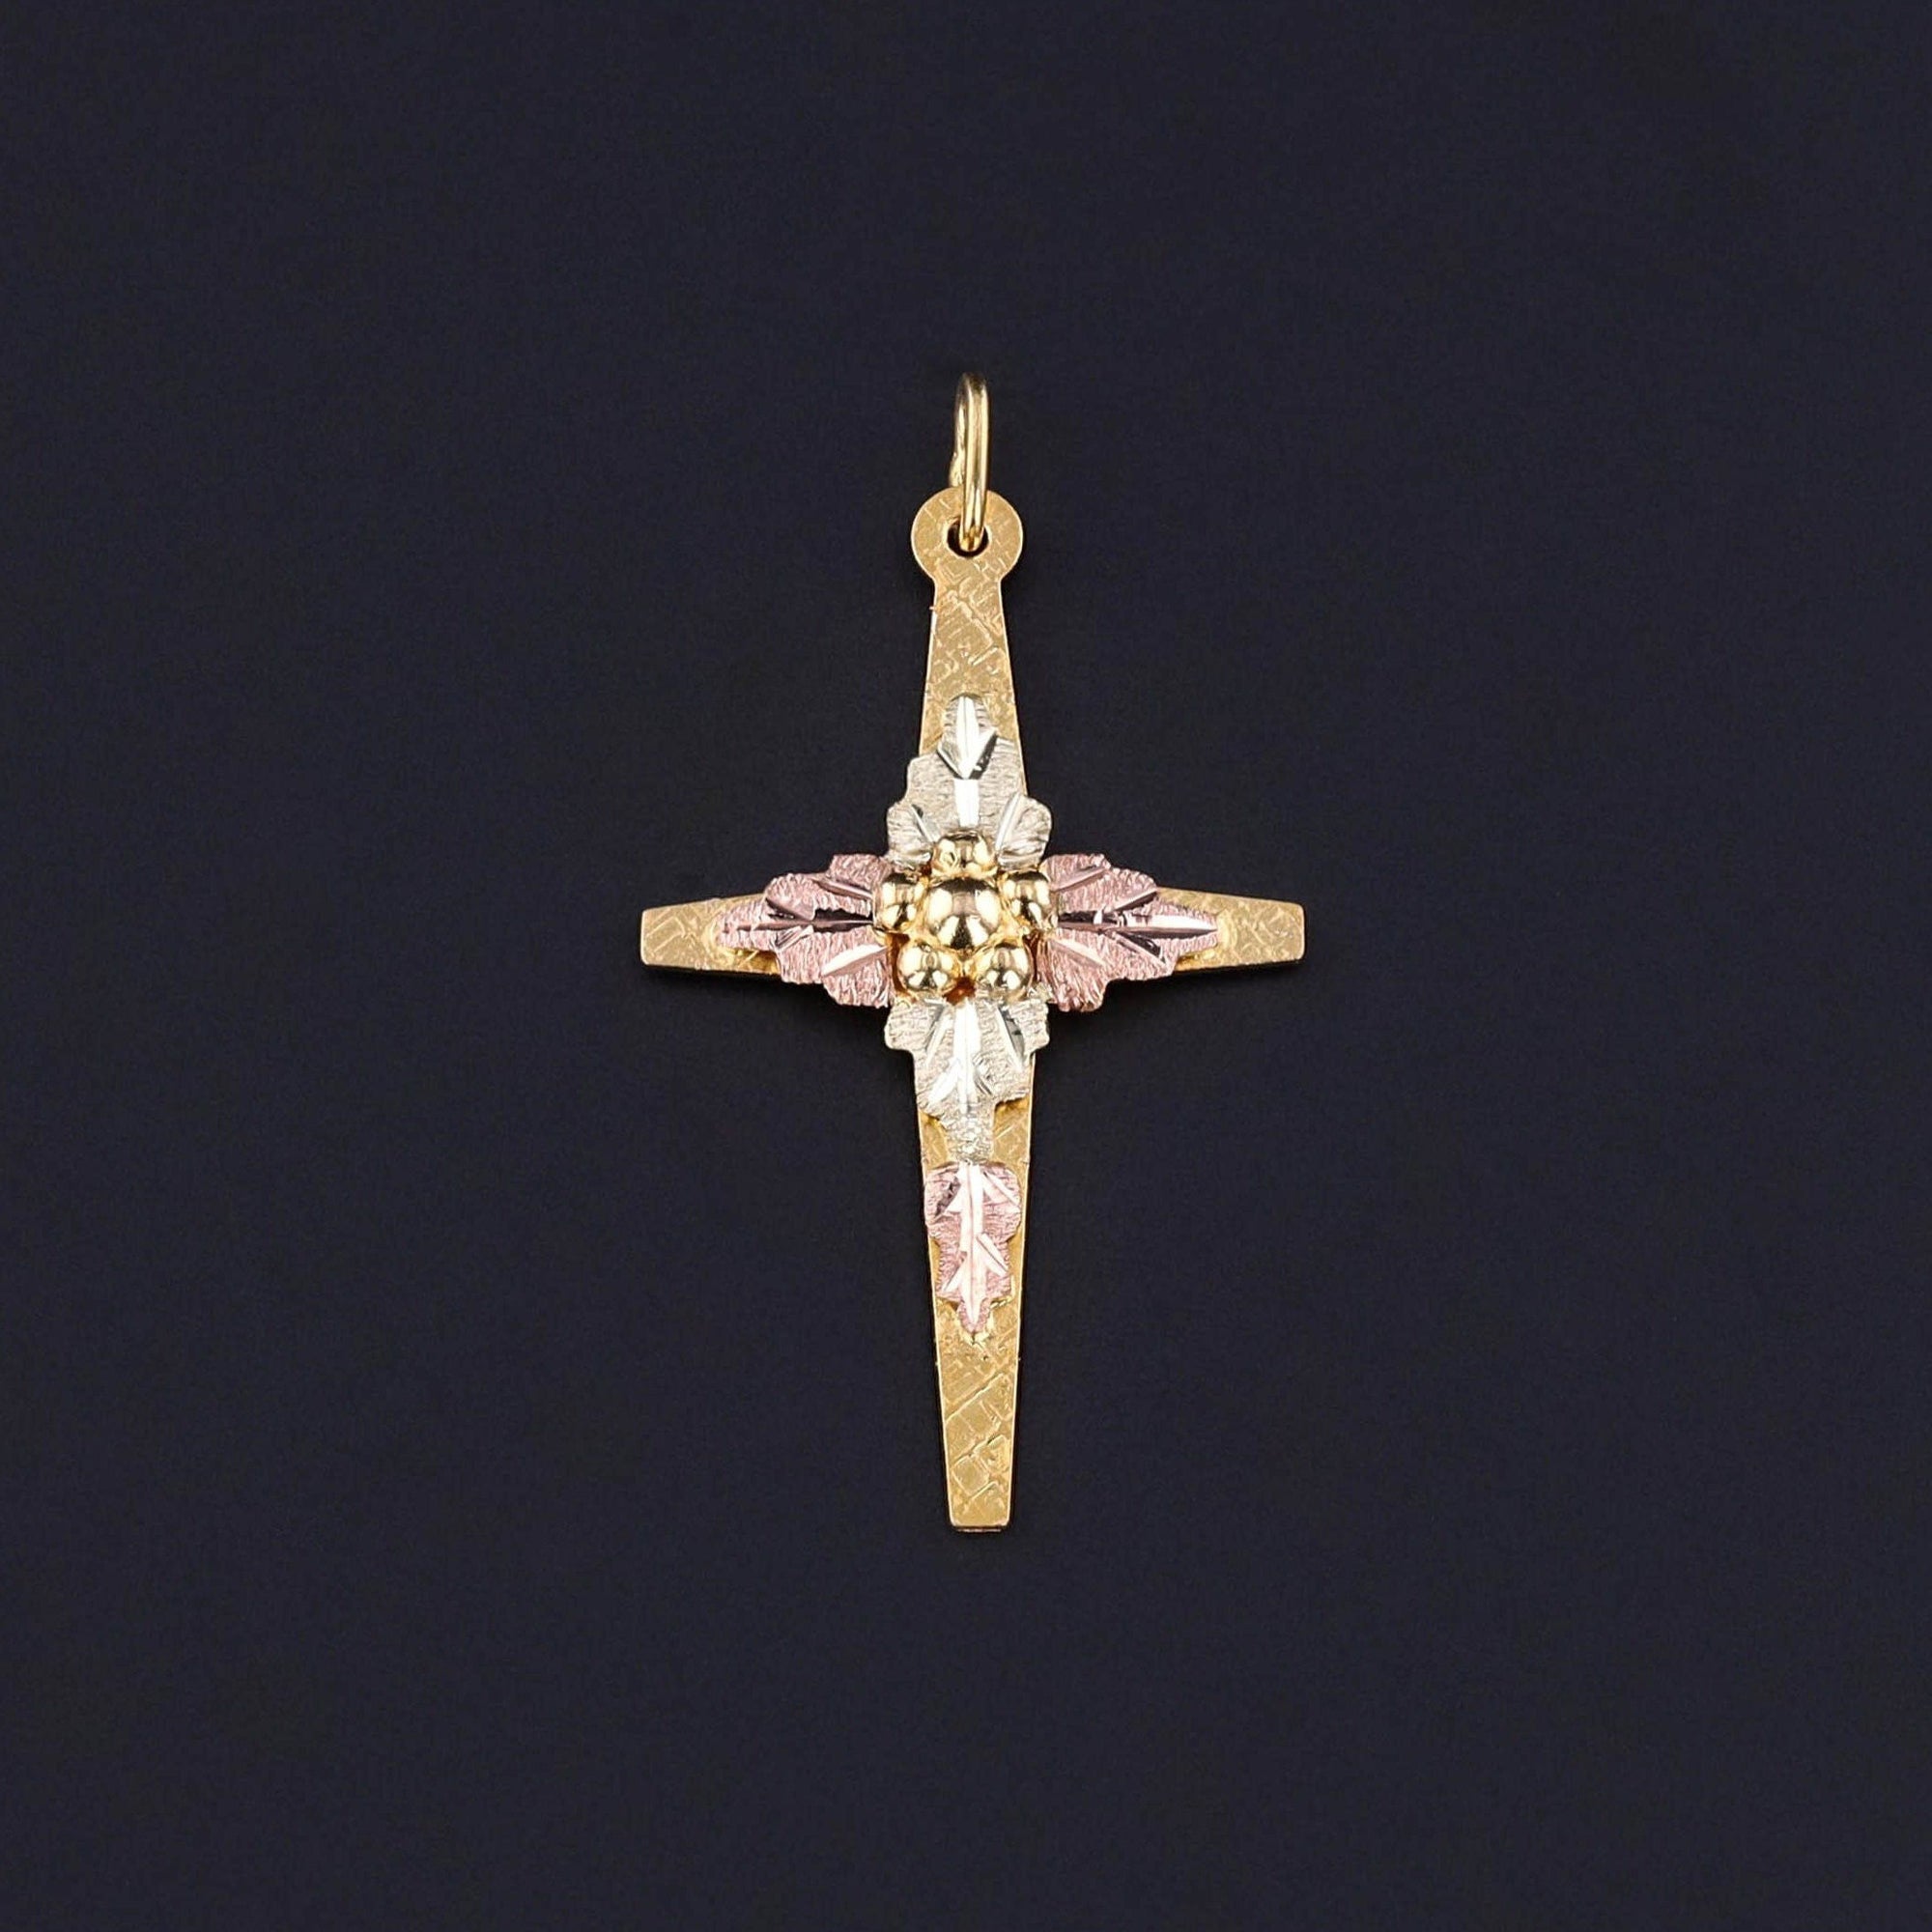 Vintage Gold Cross Pendant: This 1980s piece is perfect for anyone of Christian faith. The pendant features a yellow gold cross adorned with delicate flowers and leaves crafted from rose and green gold.